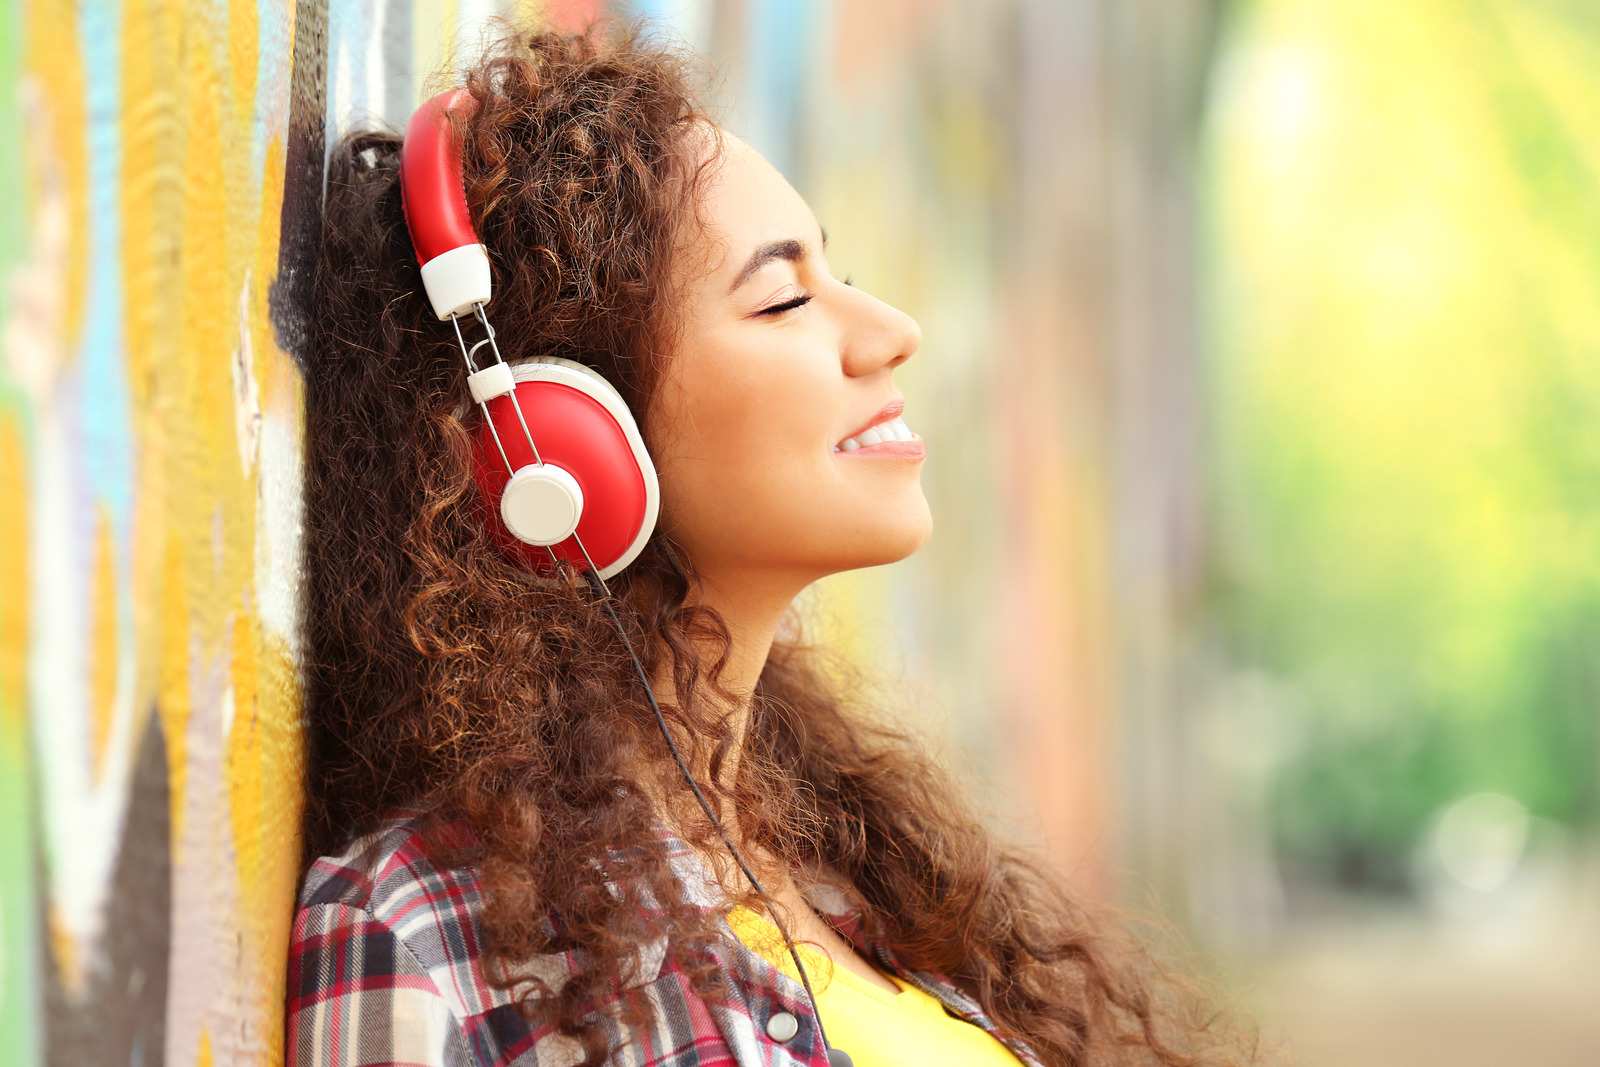 African American woman listening to music in headphones in the street